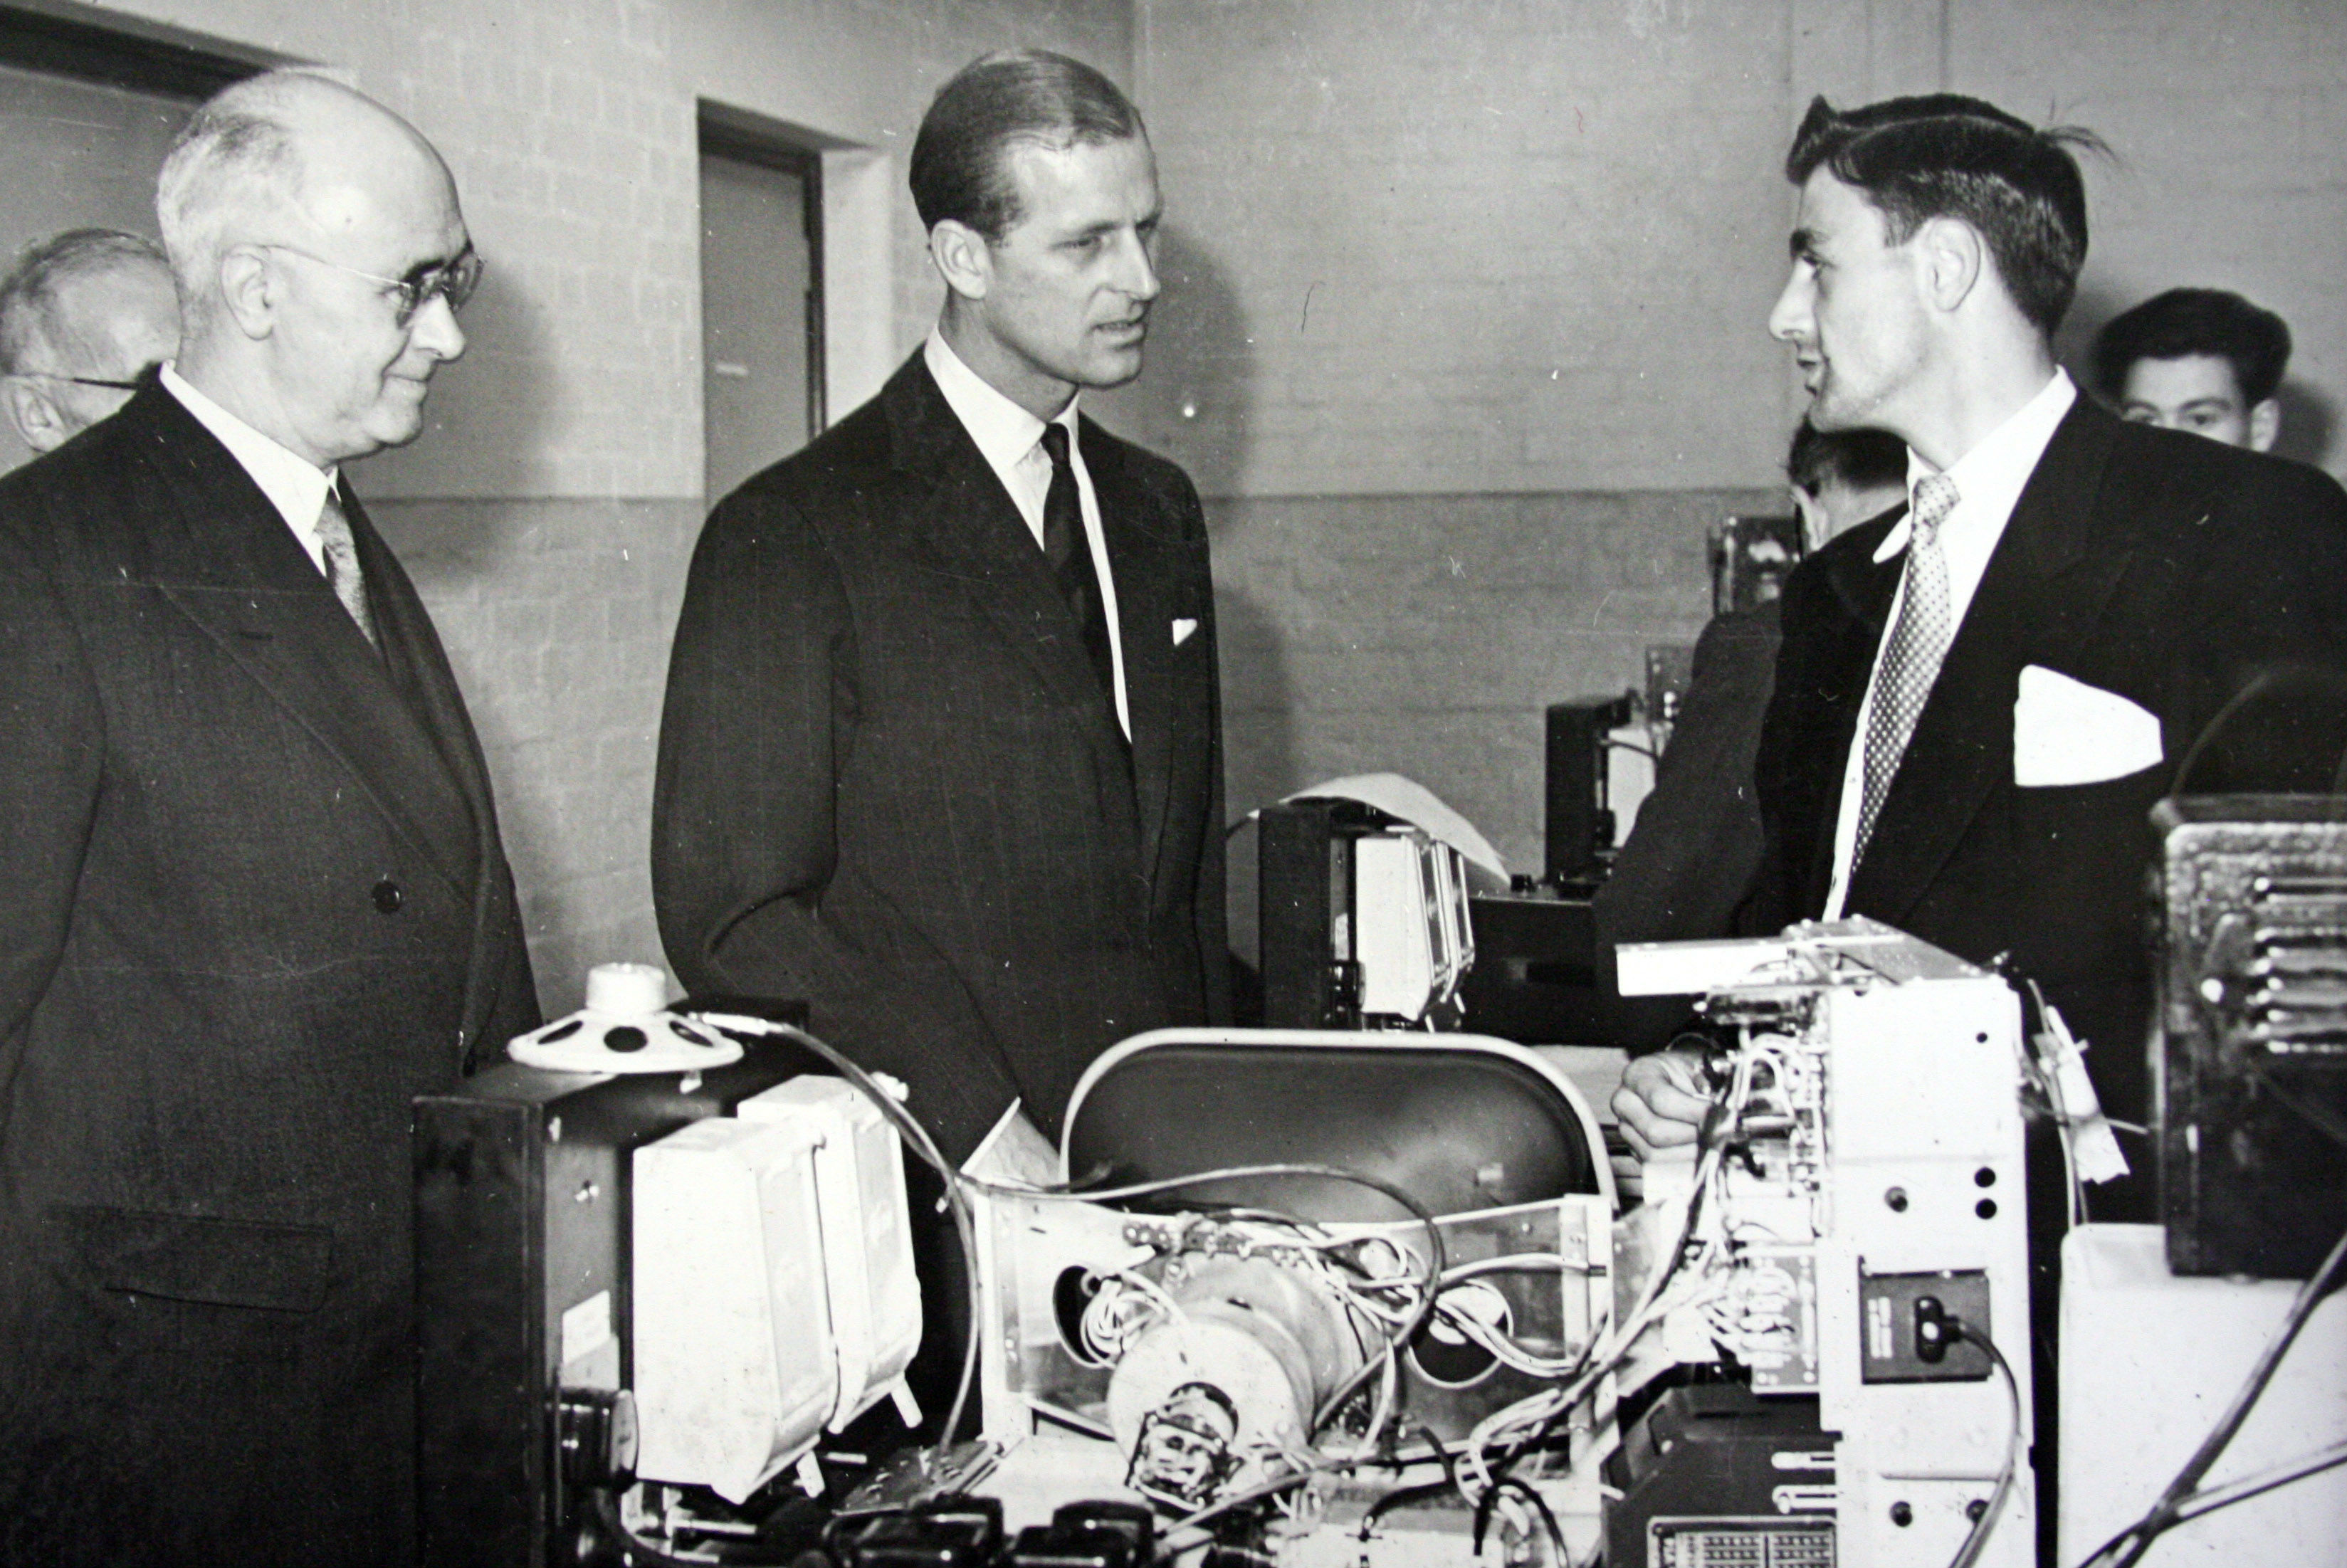 Prince Philip opens Mid Kent College, 1955